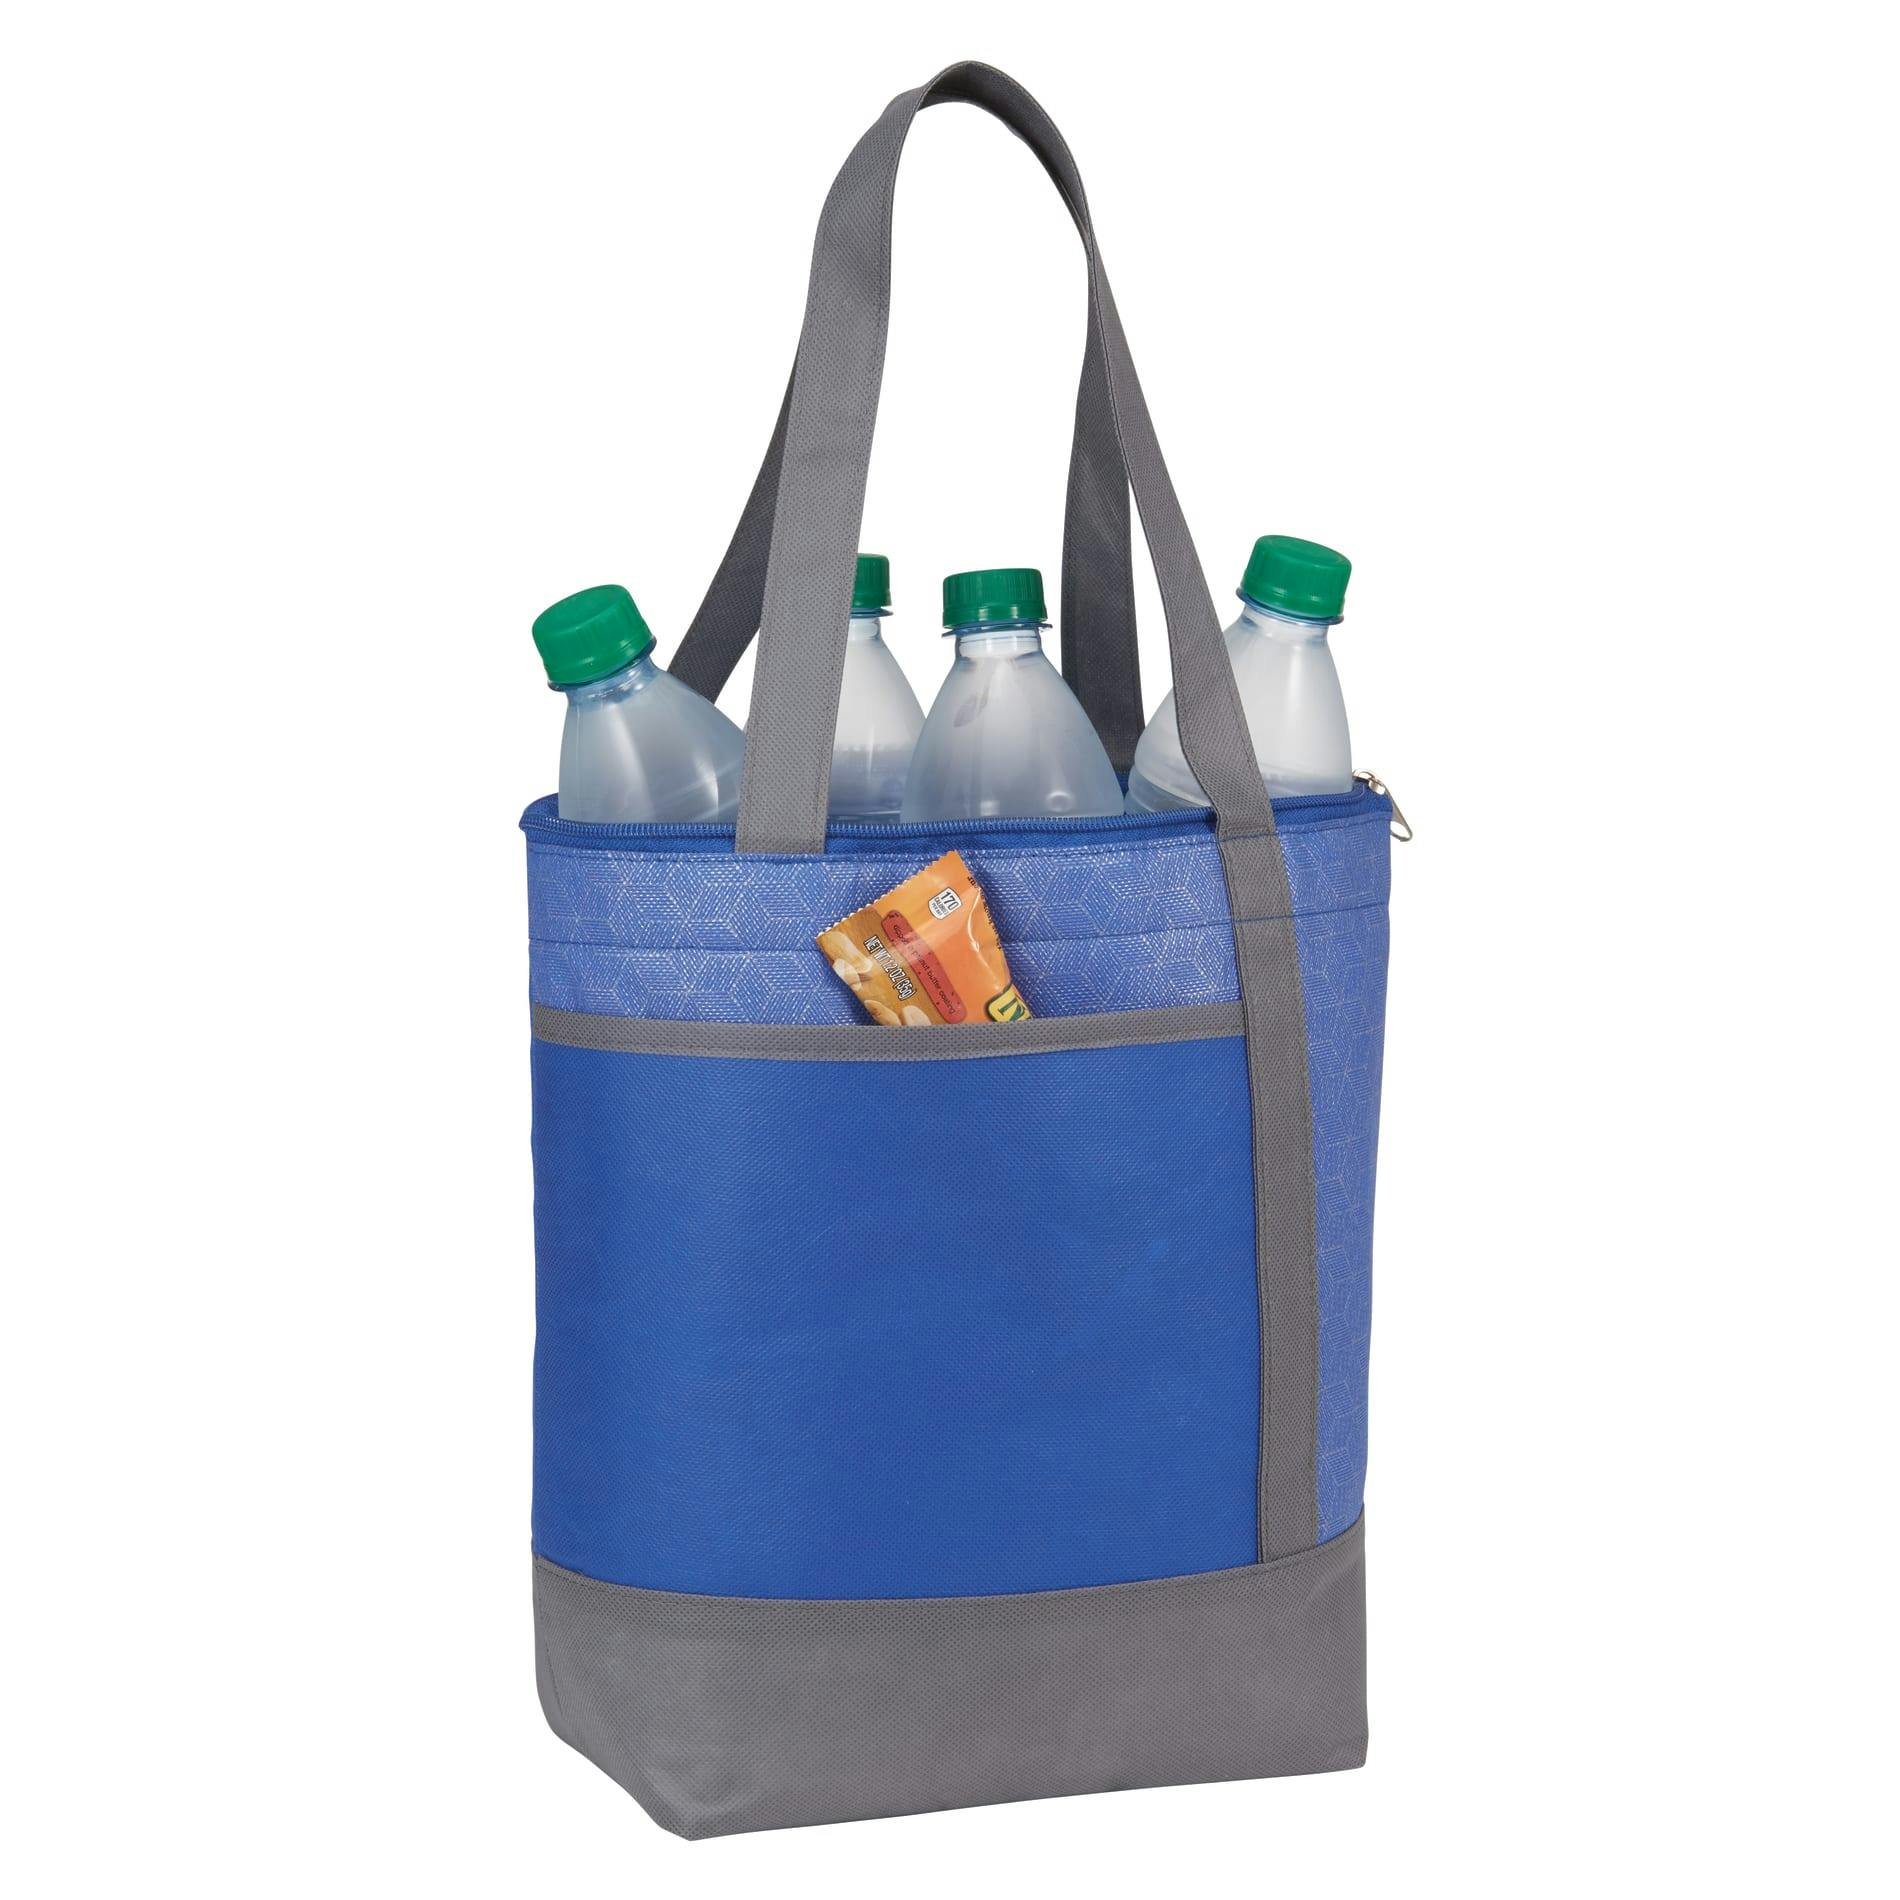 Chrome Non-Woven 9 Can Lunch Cooler - additional Image 3